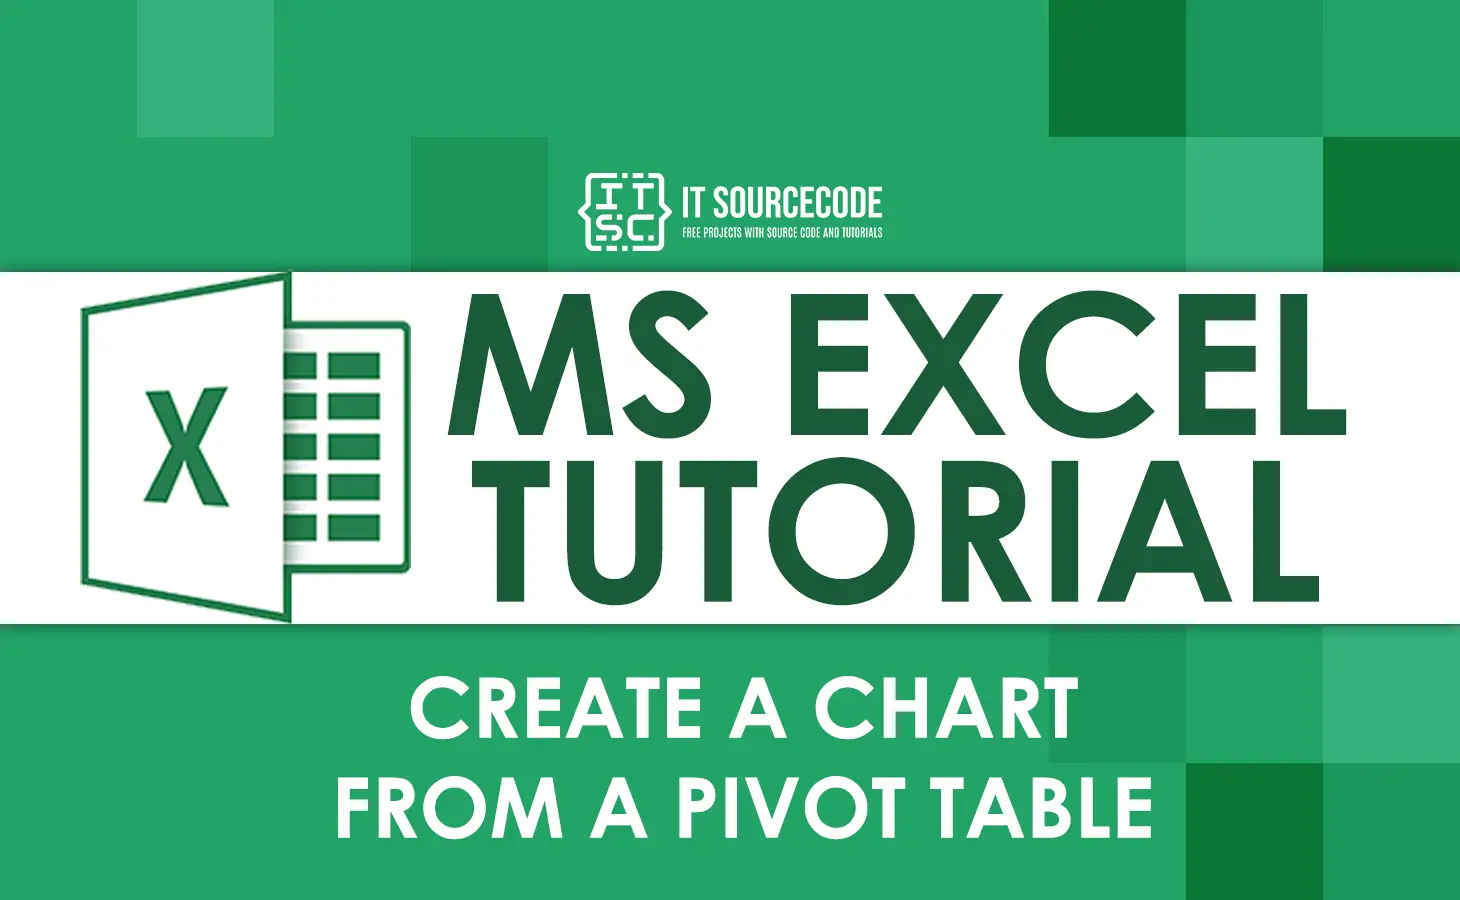 How To Create A Chart From A Pivot Table In Excel: Easy Steps